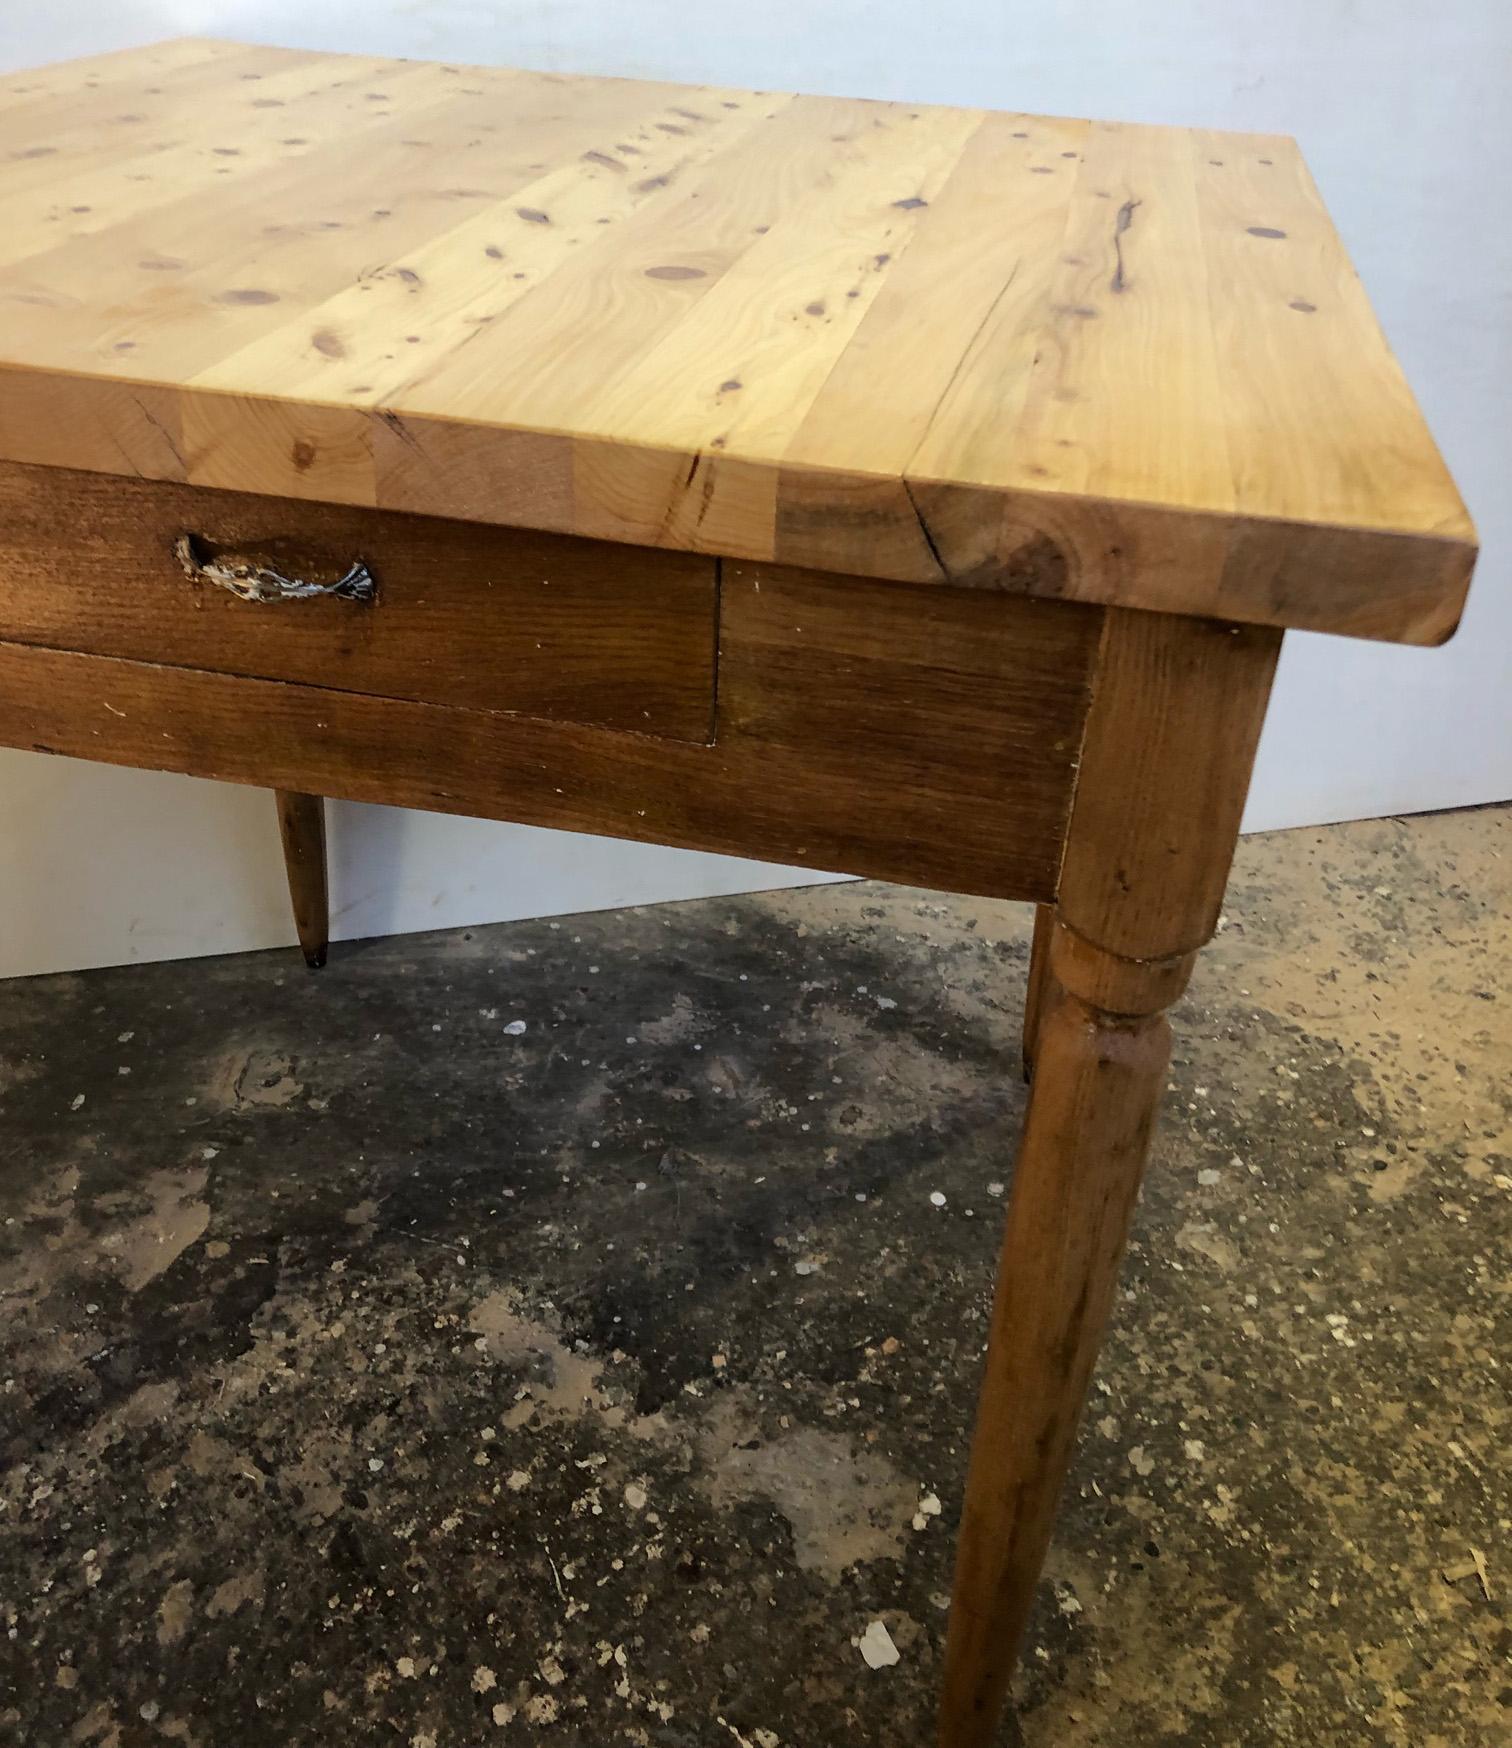 Uncommon Table in solid cypress, chestnut and fir, two-tone, Italian, natural honey-colored top, very sturdy, with drawer.
Shellac and wax finish. 
Very sturdy and solid. 
Legroom in height 62cm.
Comes from an old country house in the Chianti area